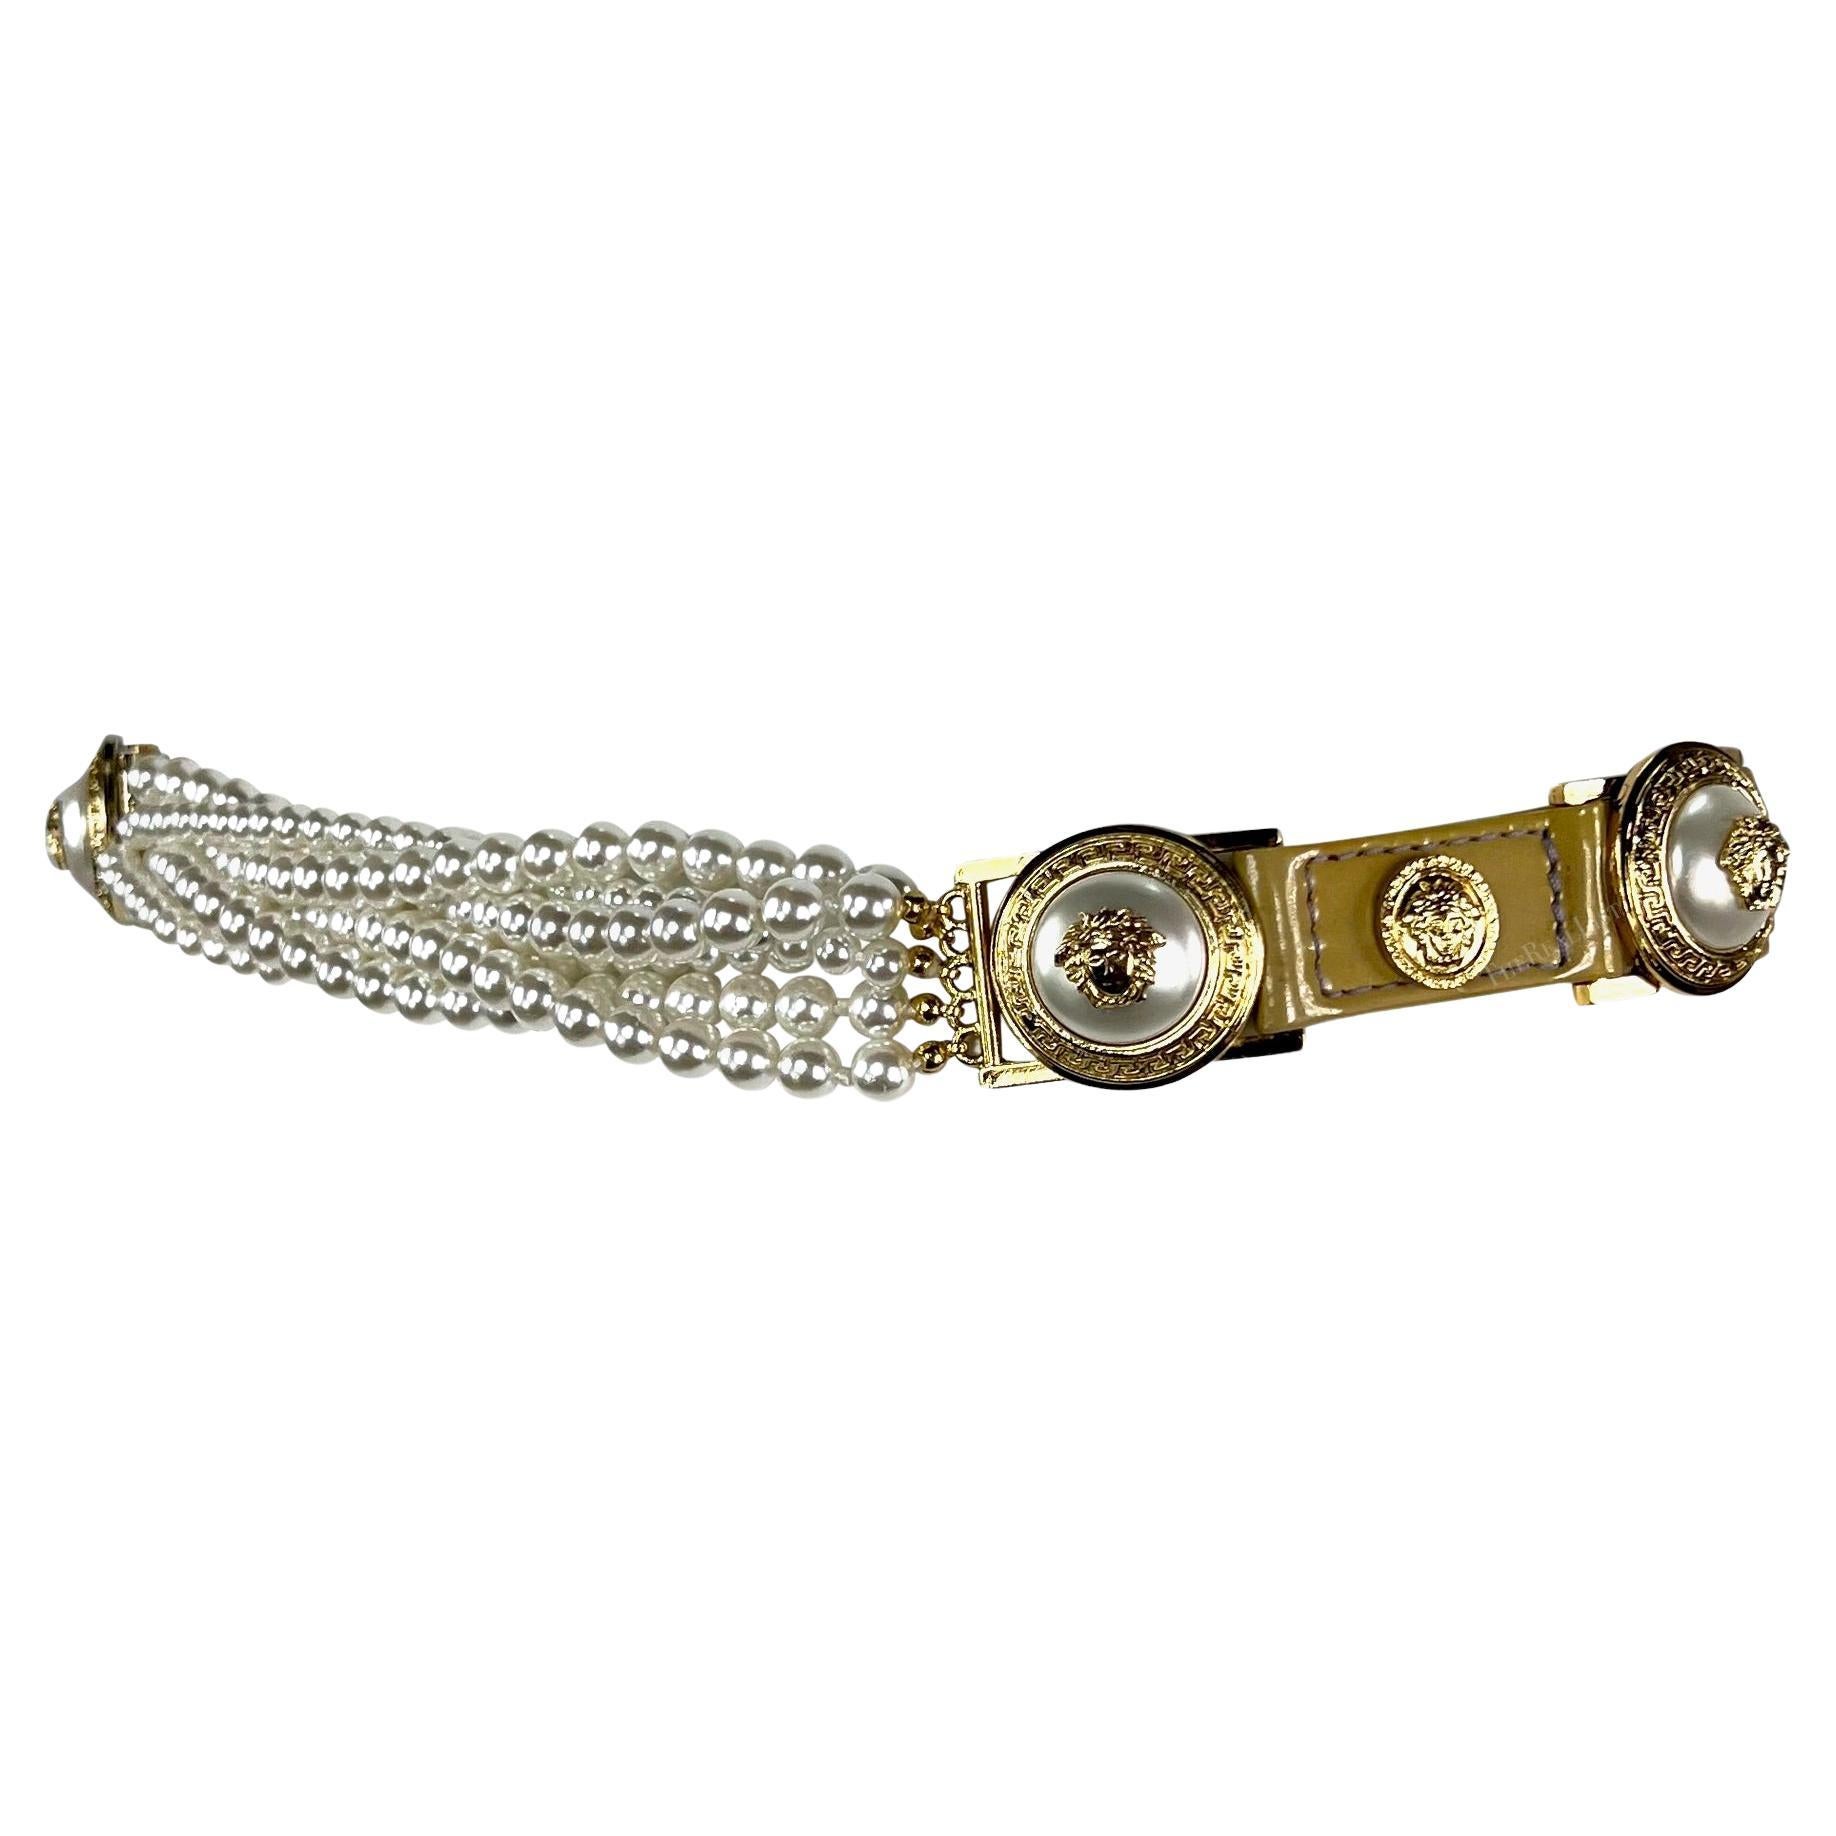  From the Fall/Winter 1994 collection, this chic tan patent leather Gianni Versace belt features tan patent leather straps outfitted with gold and faux pearl Versace Medusa emblems throughout. Designed by Gianni Versace, the belt is amped up with